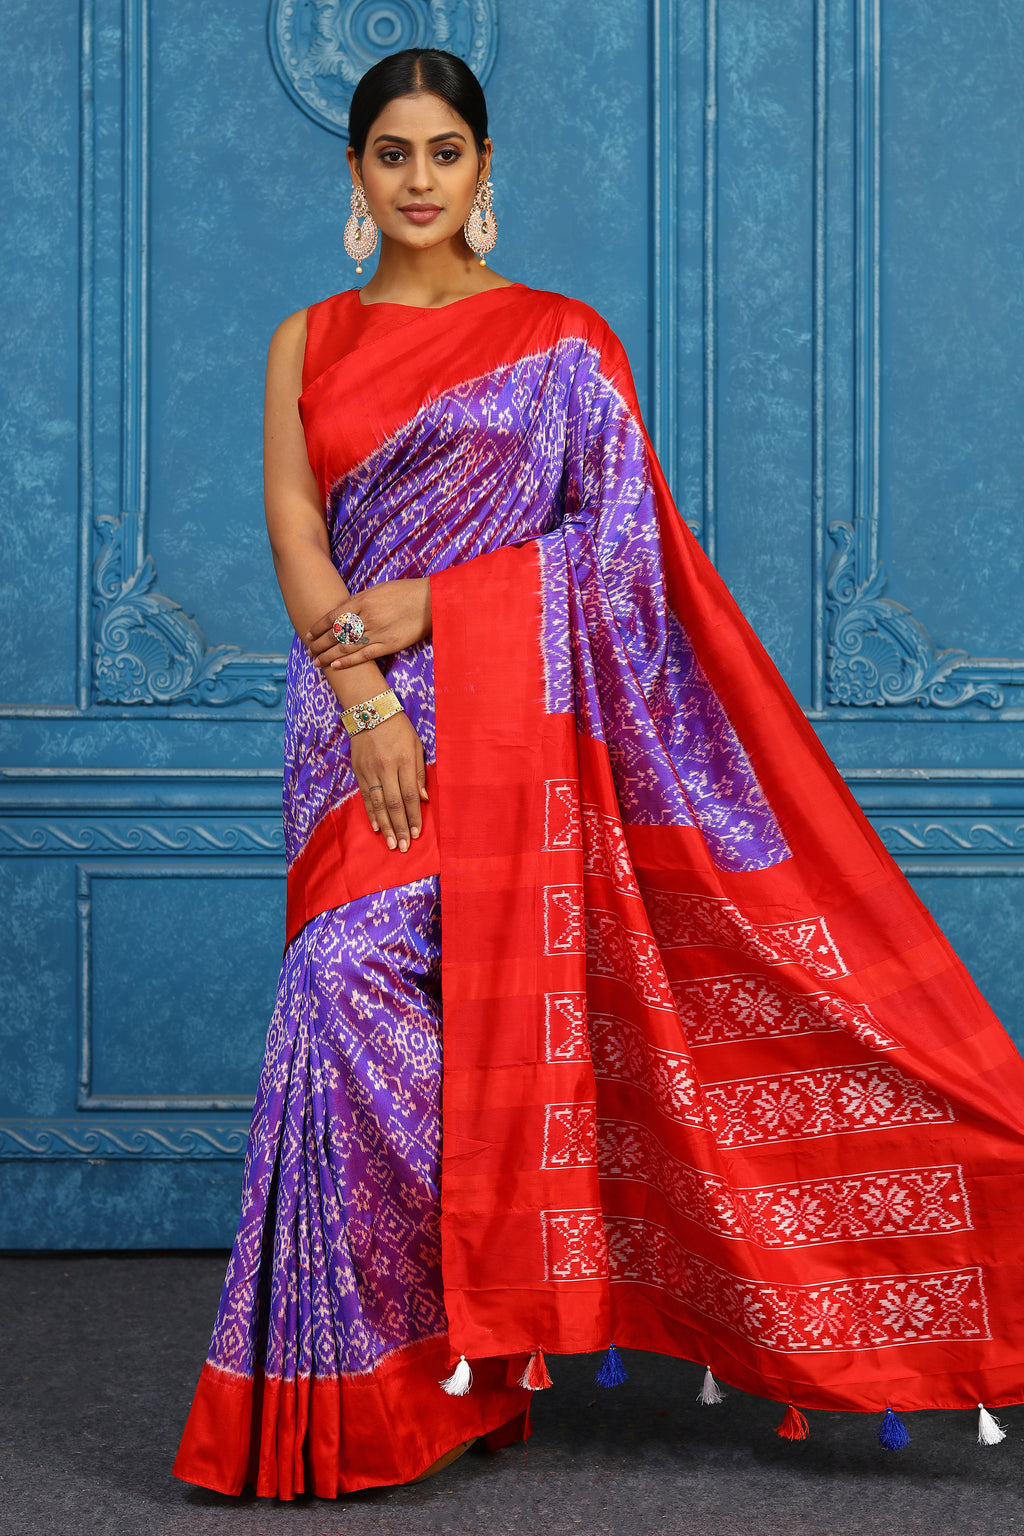 Buy purple pochampally silk ikkat saree online in USA with red border. Look your best on festive occasions in latest designer sarees, pure silk sarees, Kanchipuram sarees, handwoven sarees, tussar silk sarees, embroidered sarees from Pure Elegance Indian clothing store in USA.-full view